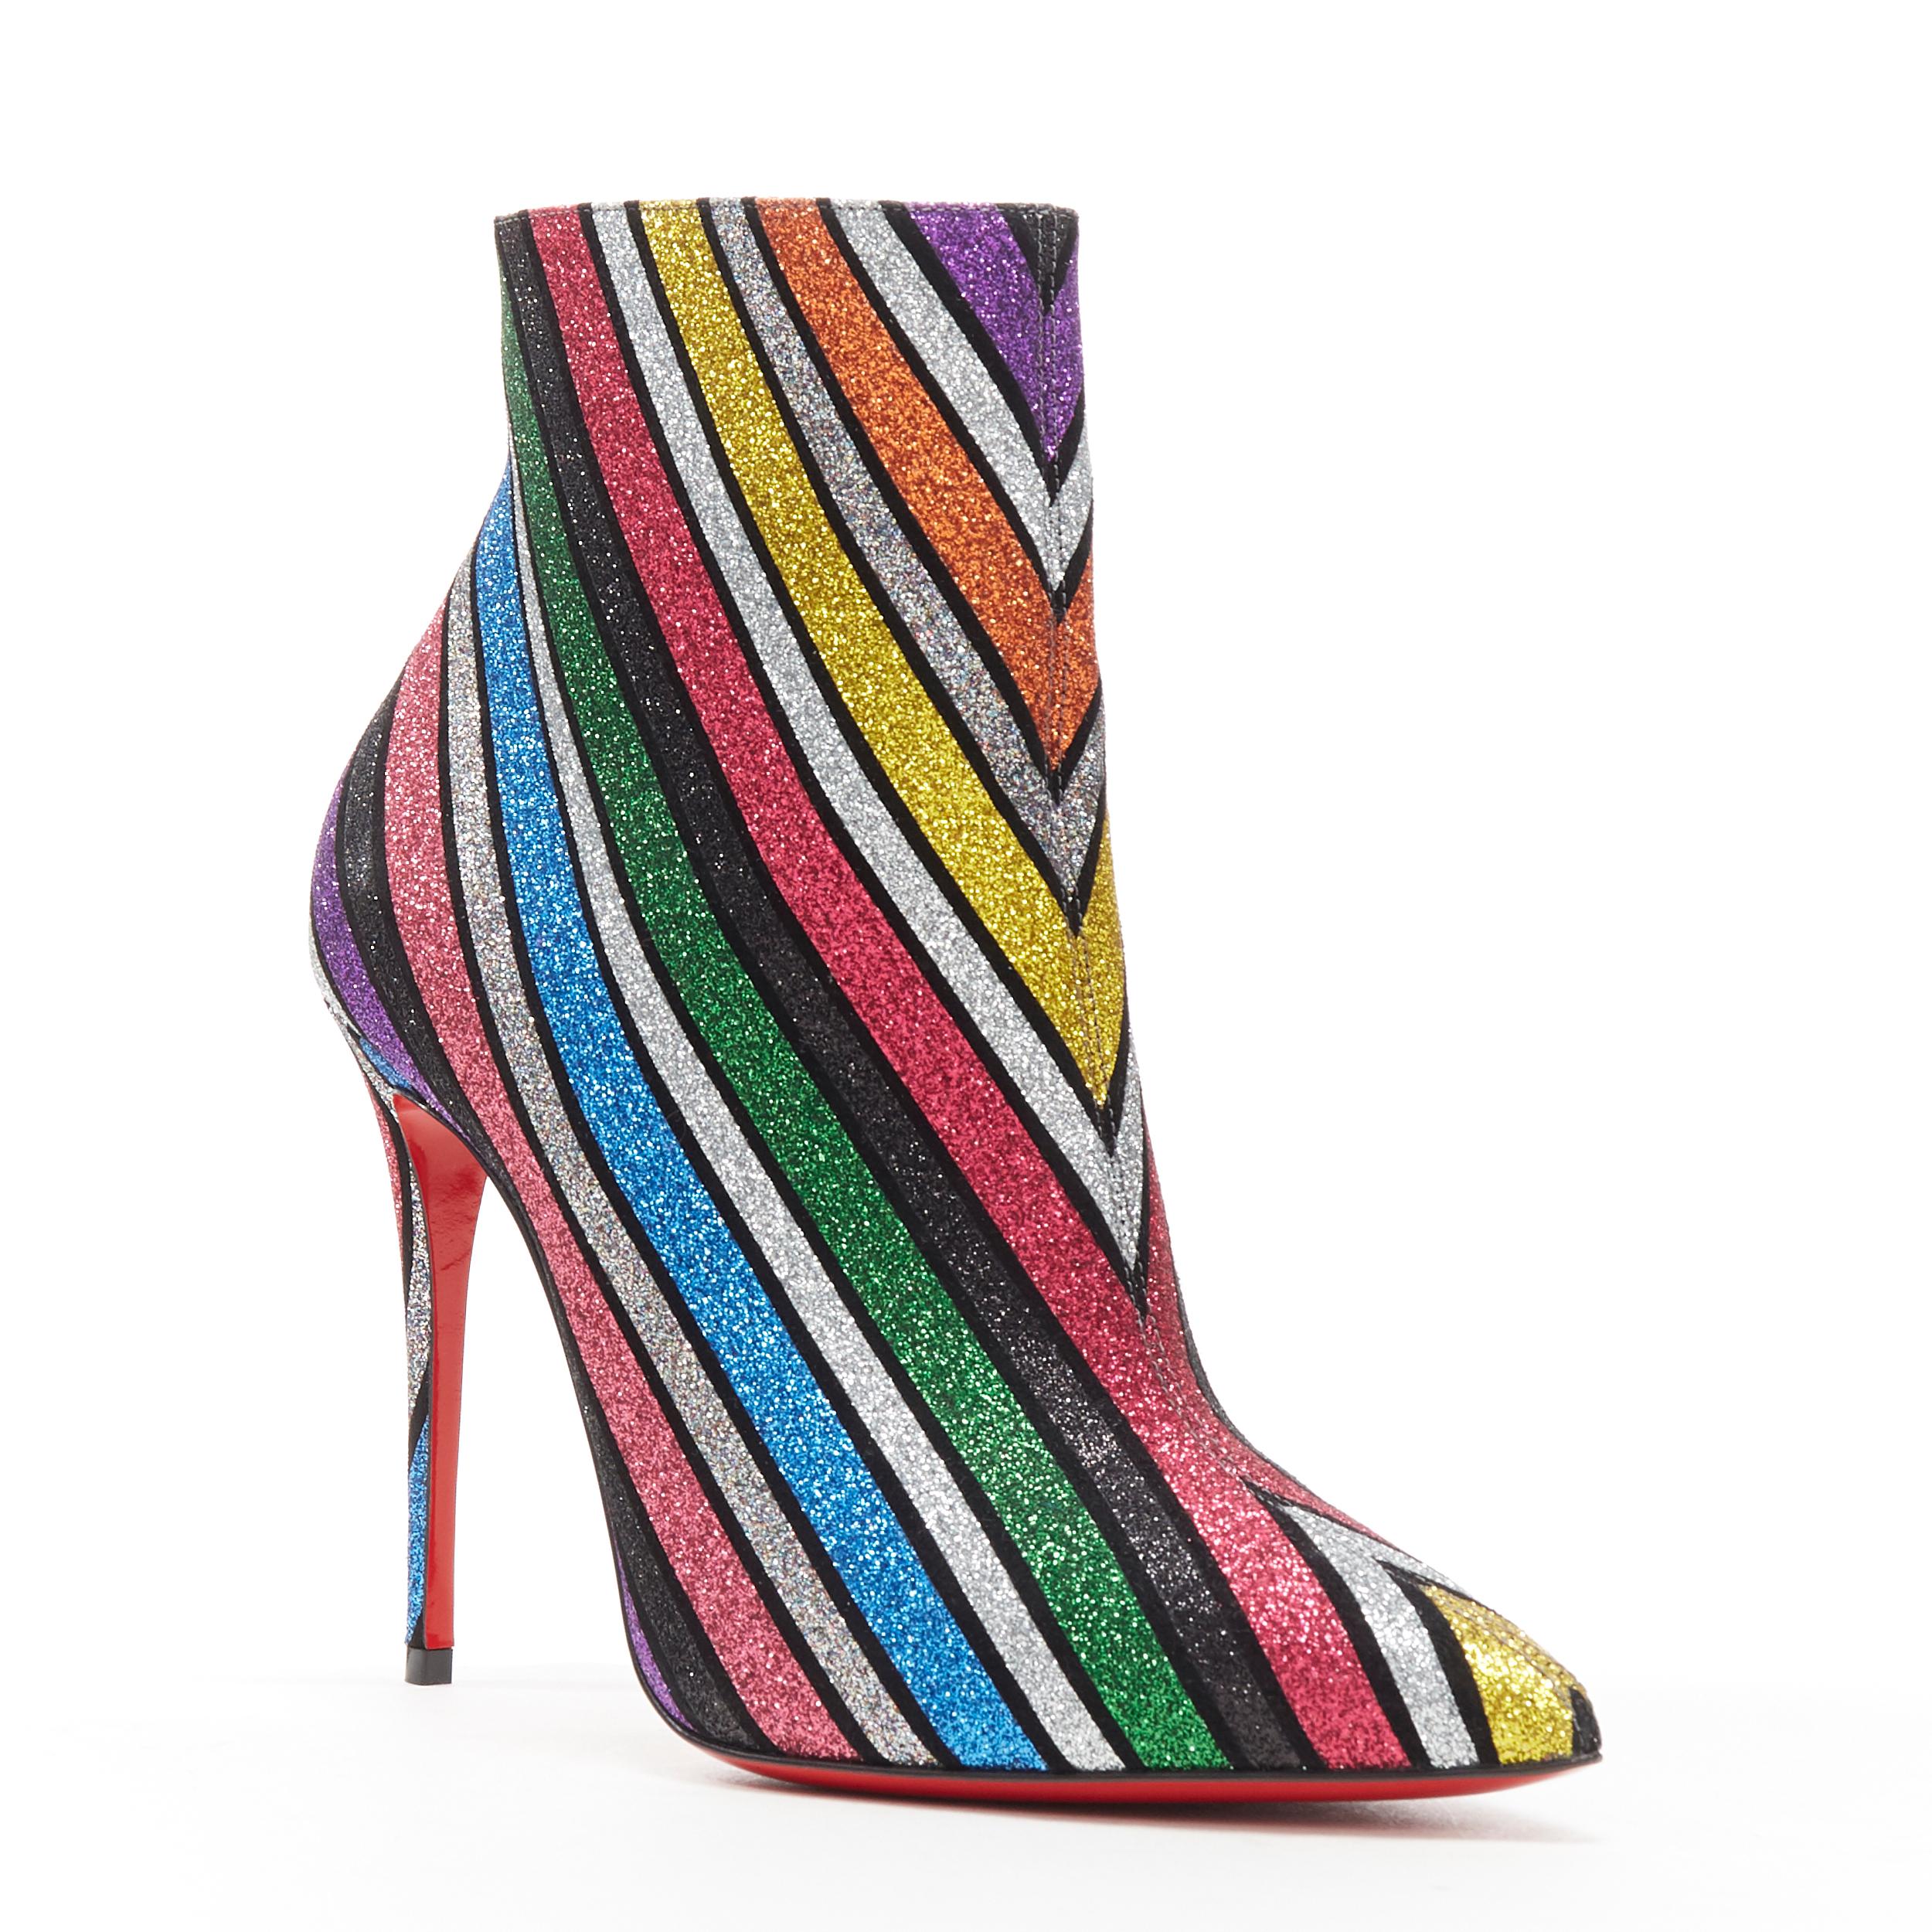 new CHRISTIAN LOUBOUTIN So Kate Booty 100 glitter multi stripe ankle boots EU39
Brand: Christian Louboutin
Designer: Christian Louboutin
Model Name / Style: So Kate Booty 100
Material: Leather
Color: Multicolour
Pattern: Striped
Closure: Zip
Extra